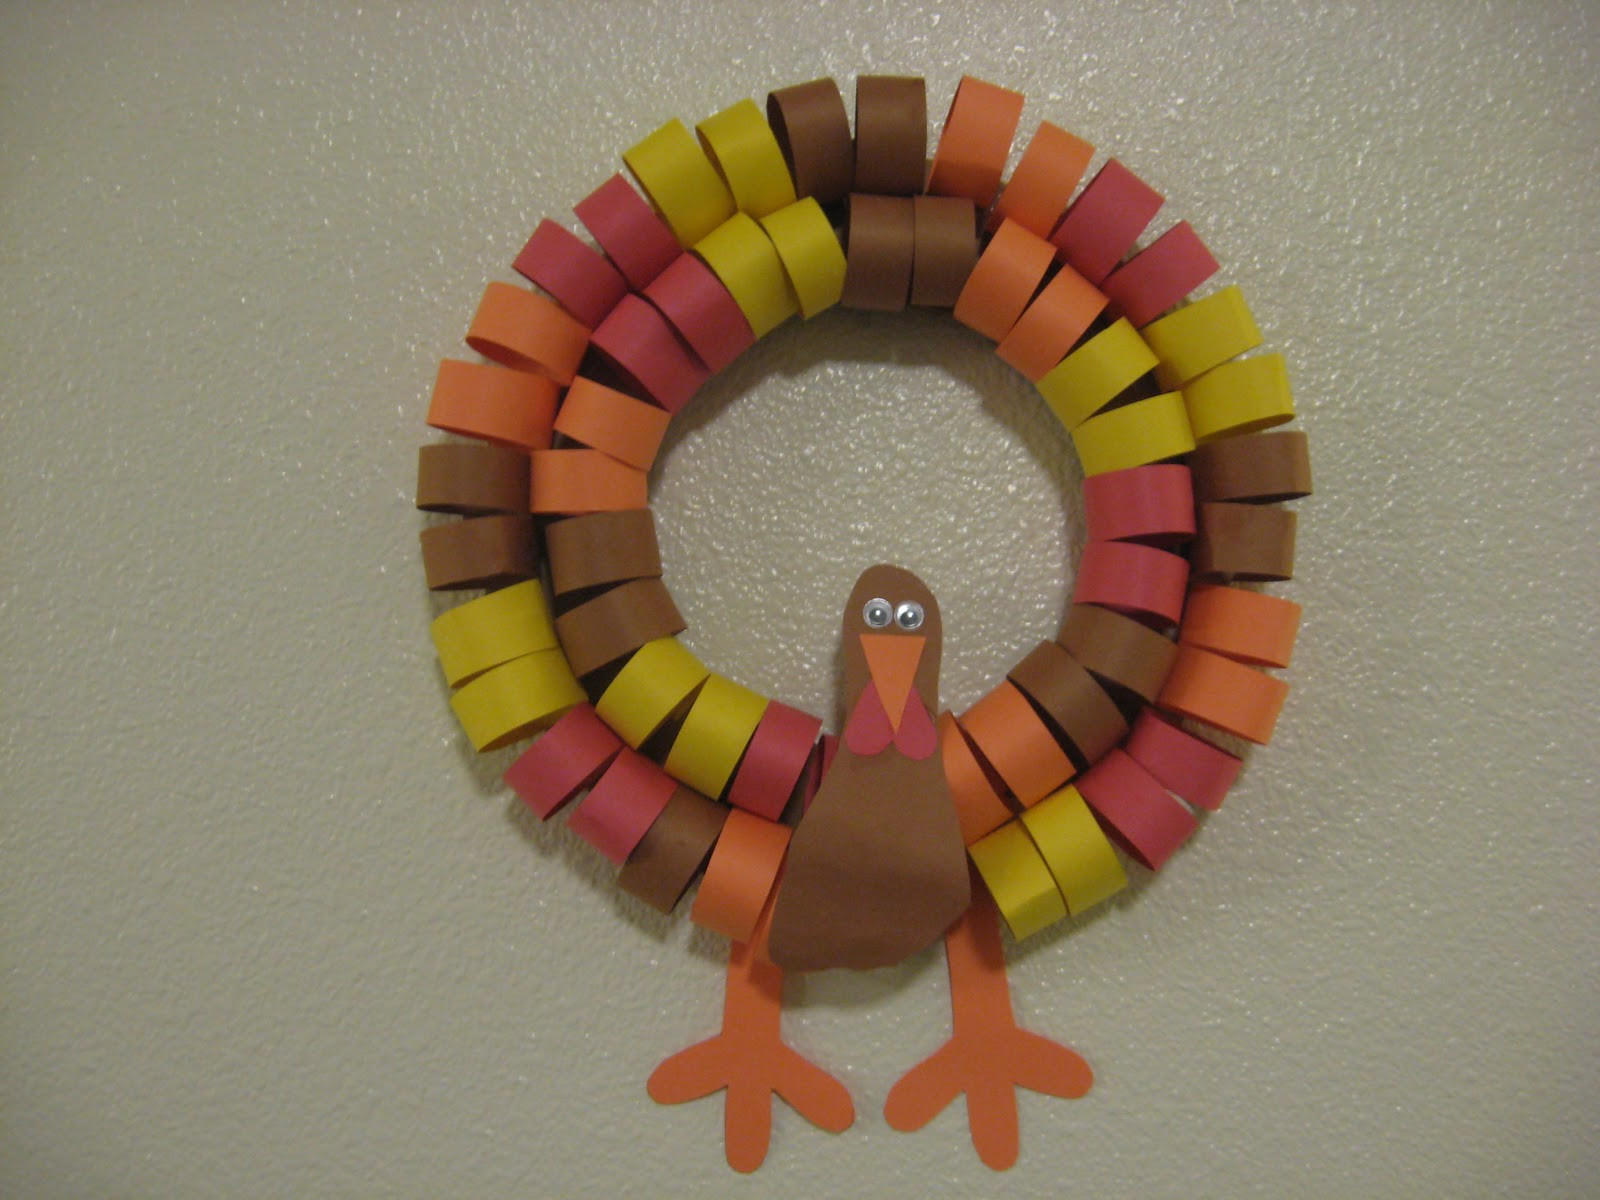 Thanksgiving Art And Craft Ideas For Toddlers
 Hugs and Keepsakes 18 THANKSGIVING CRAFT IDEAS